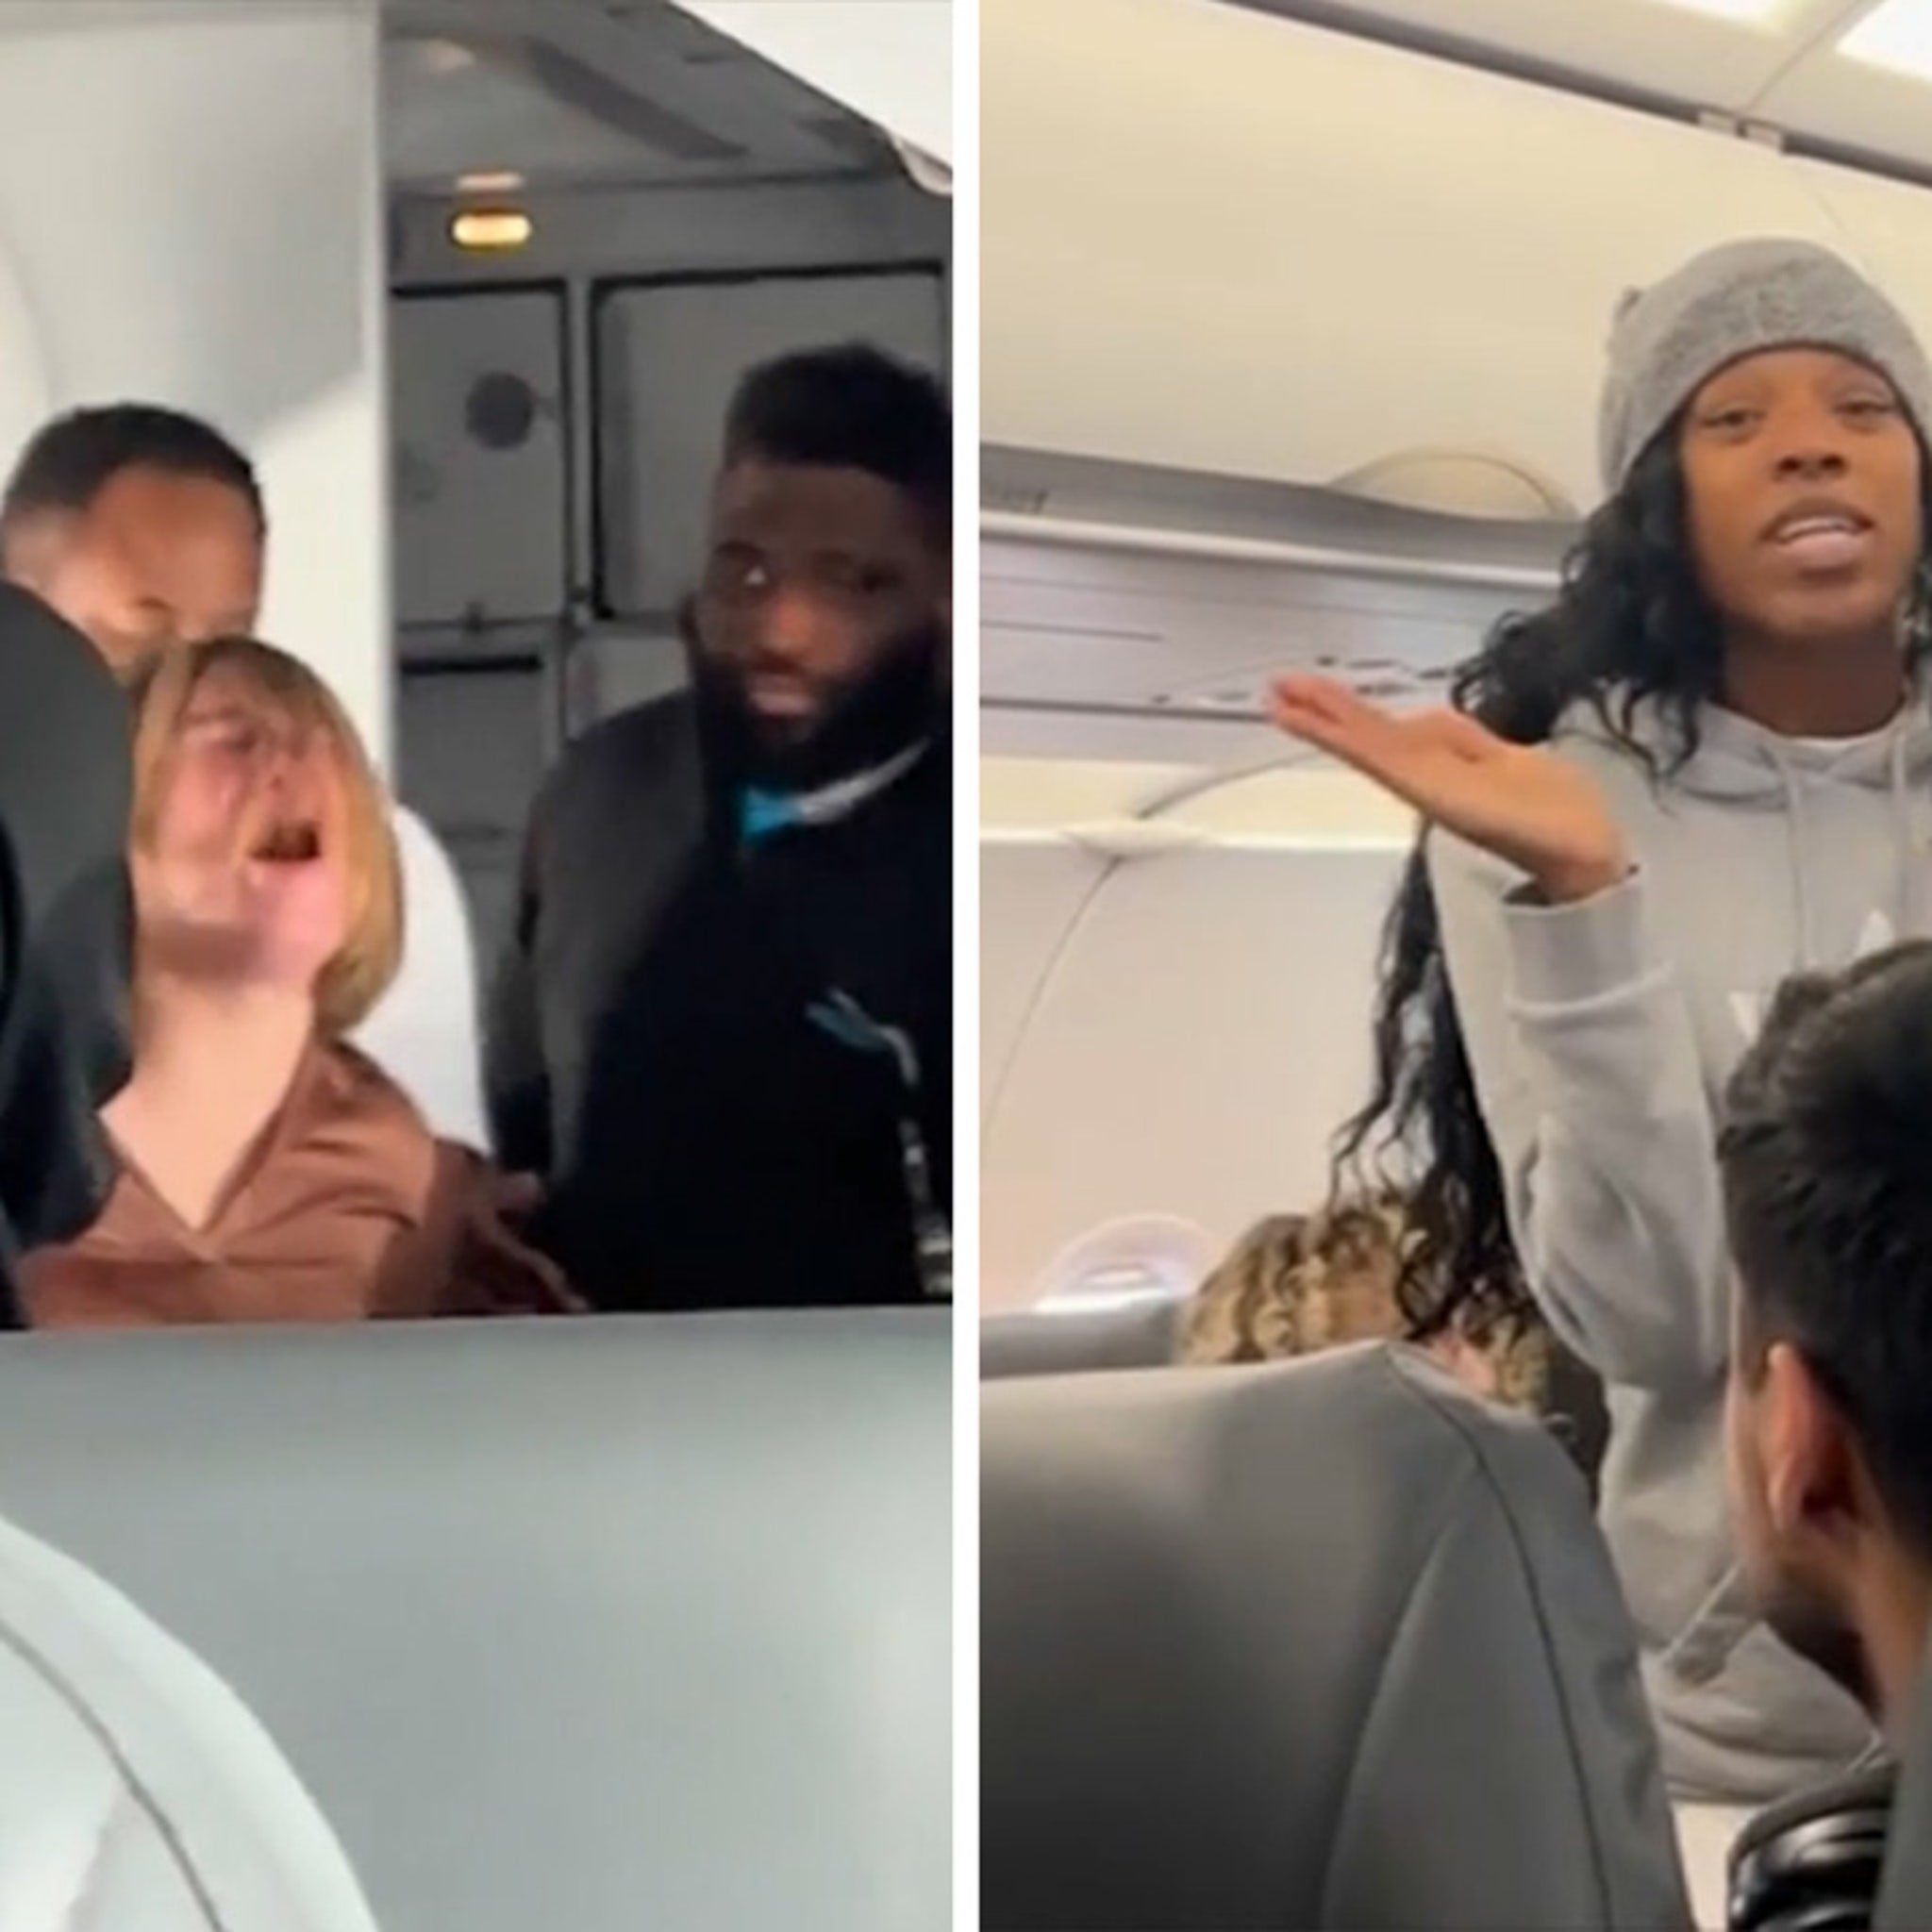 Woman Threatens to Pee in Airplane Aisle, Pulls Down Pants and Squats